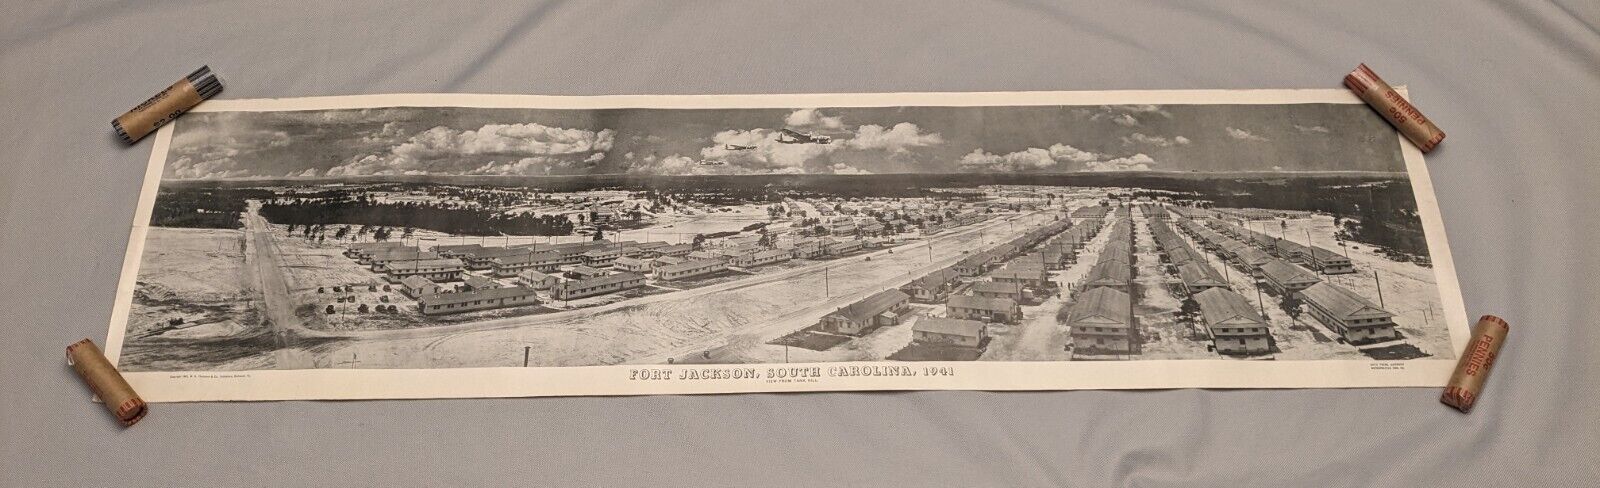 Panoramic WW2 Photo - Fort Jackson SC - 41 Inches Wide Antique / Vintage